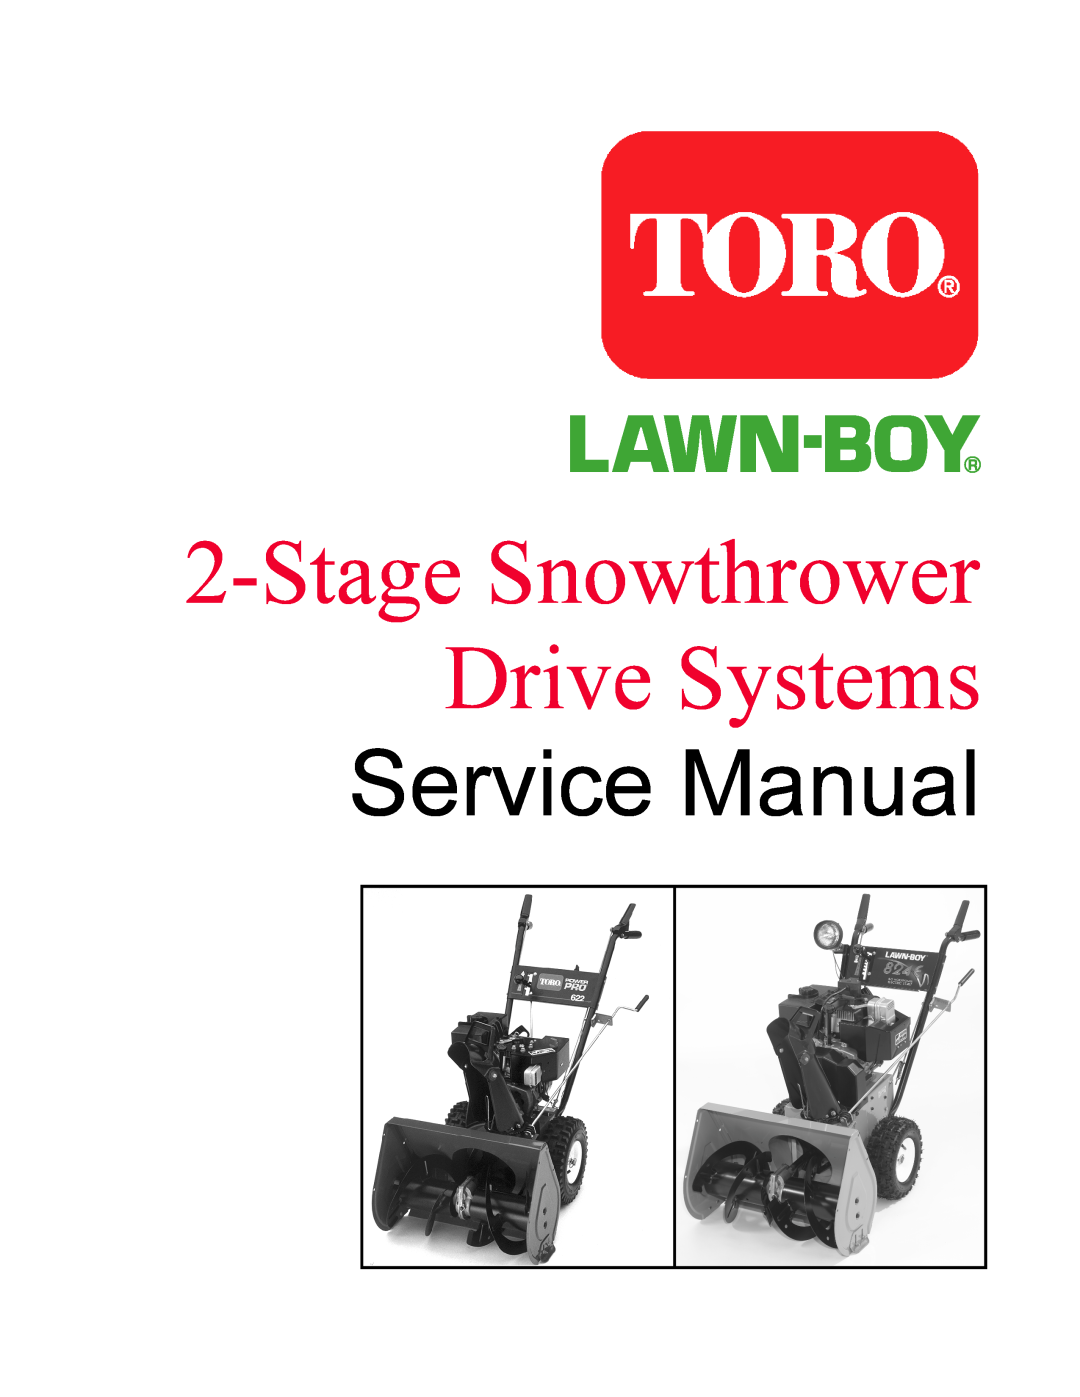 Toro 38065, 38080 manual Stage Snowthrower Drive Systems, Service Manual 